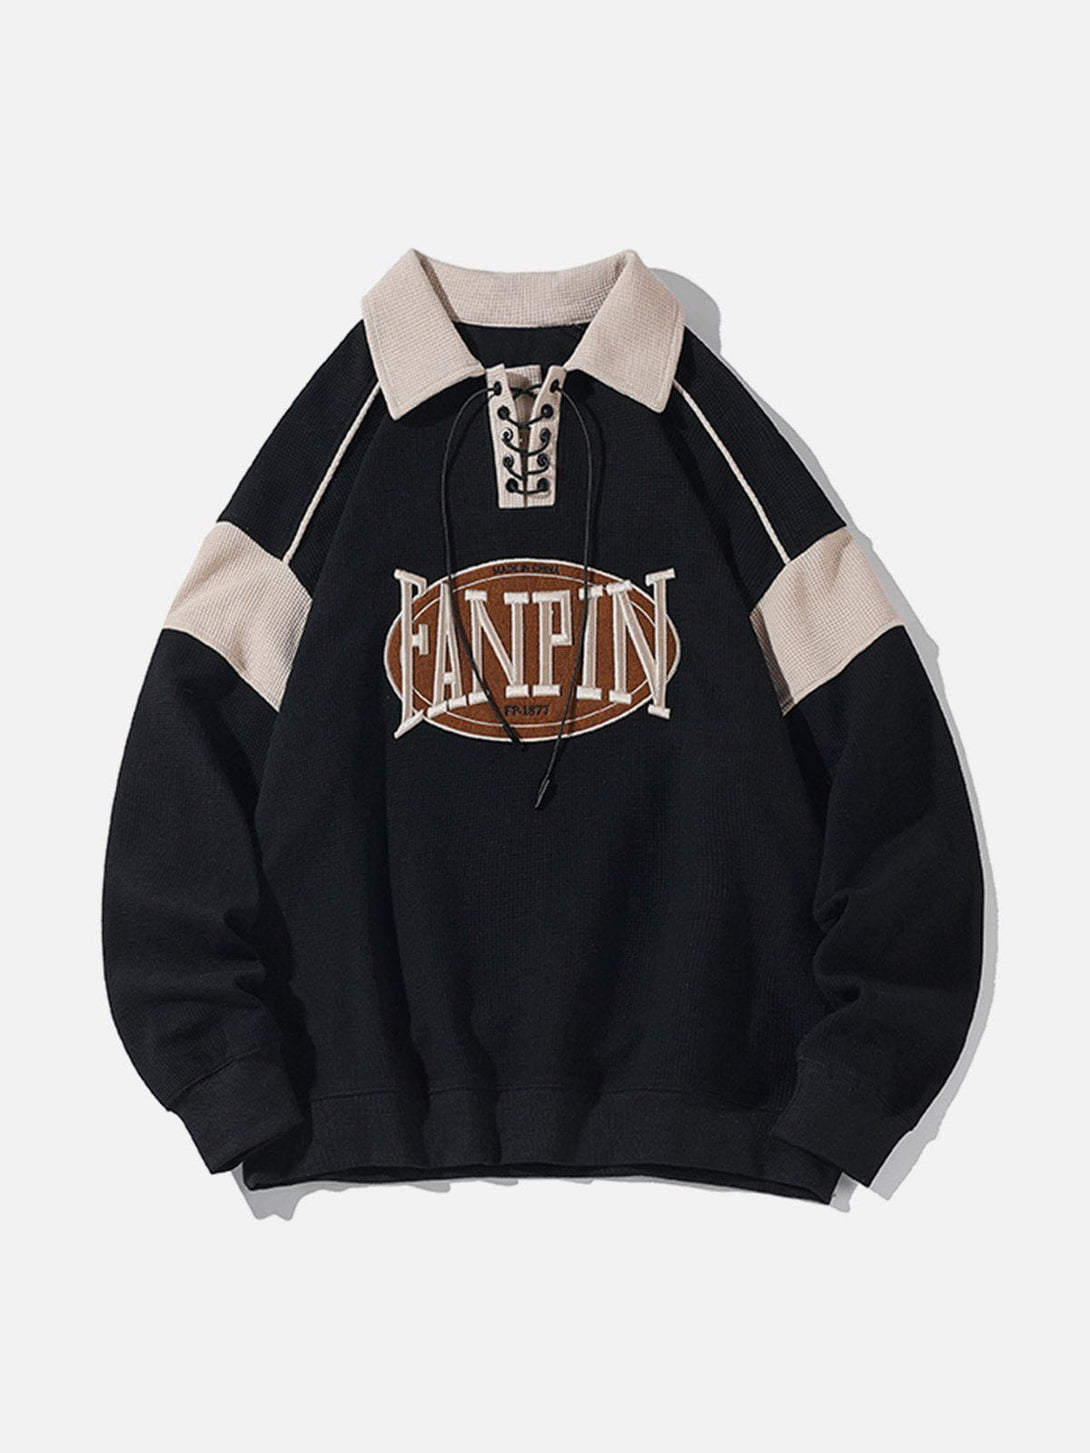 Levefly - Embroidery Lettered Sweatshirt - Streetwear Fashion - levefly.com